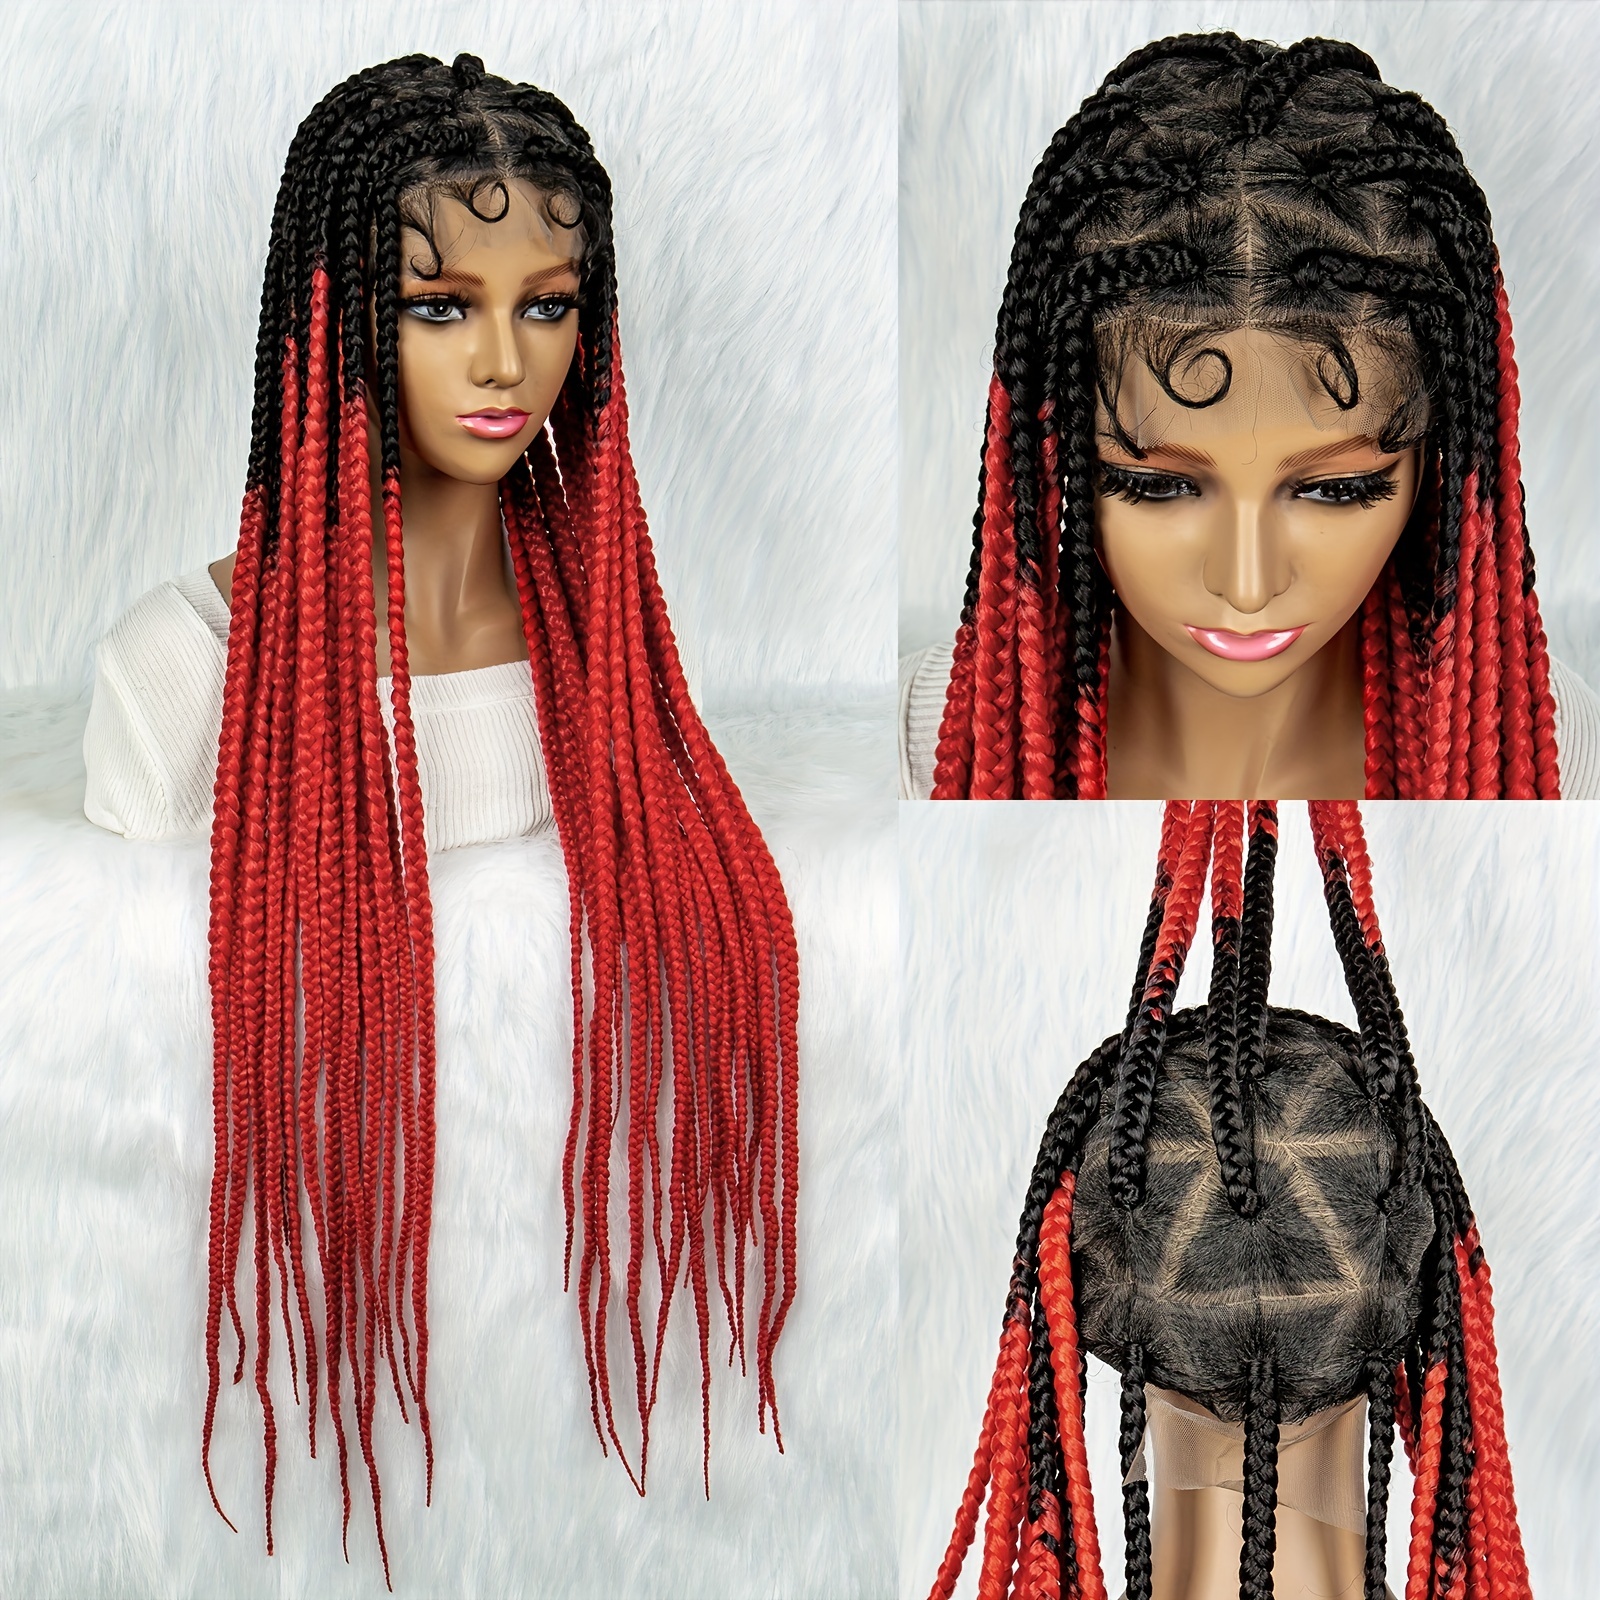 13x8 HD Lace Front Braided Wigs with Baby Hair Box Braid Wig Cornrow  Braided Wigs for Women Middle Parted Synthetic Braided Lace Front Wigs  Black 36